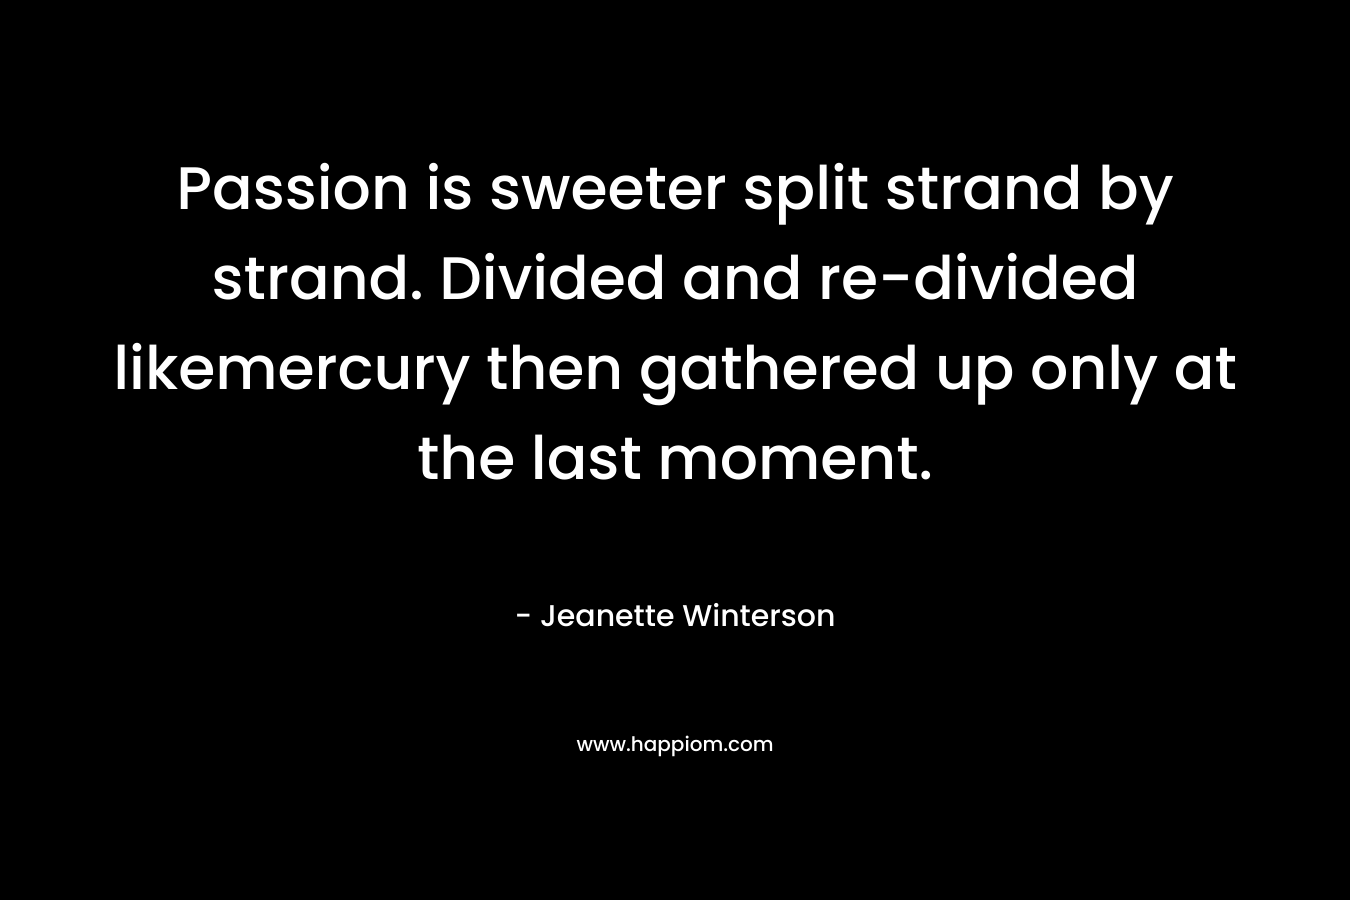 Passion is sweeter split strand by strand. Divided and re-divided likemercury then gathered up only at the last moment.